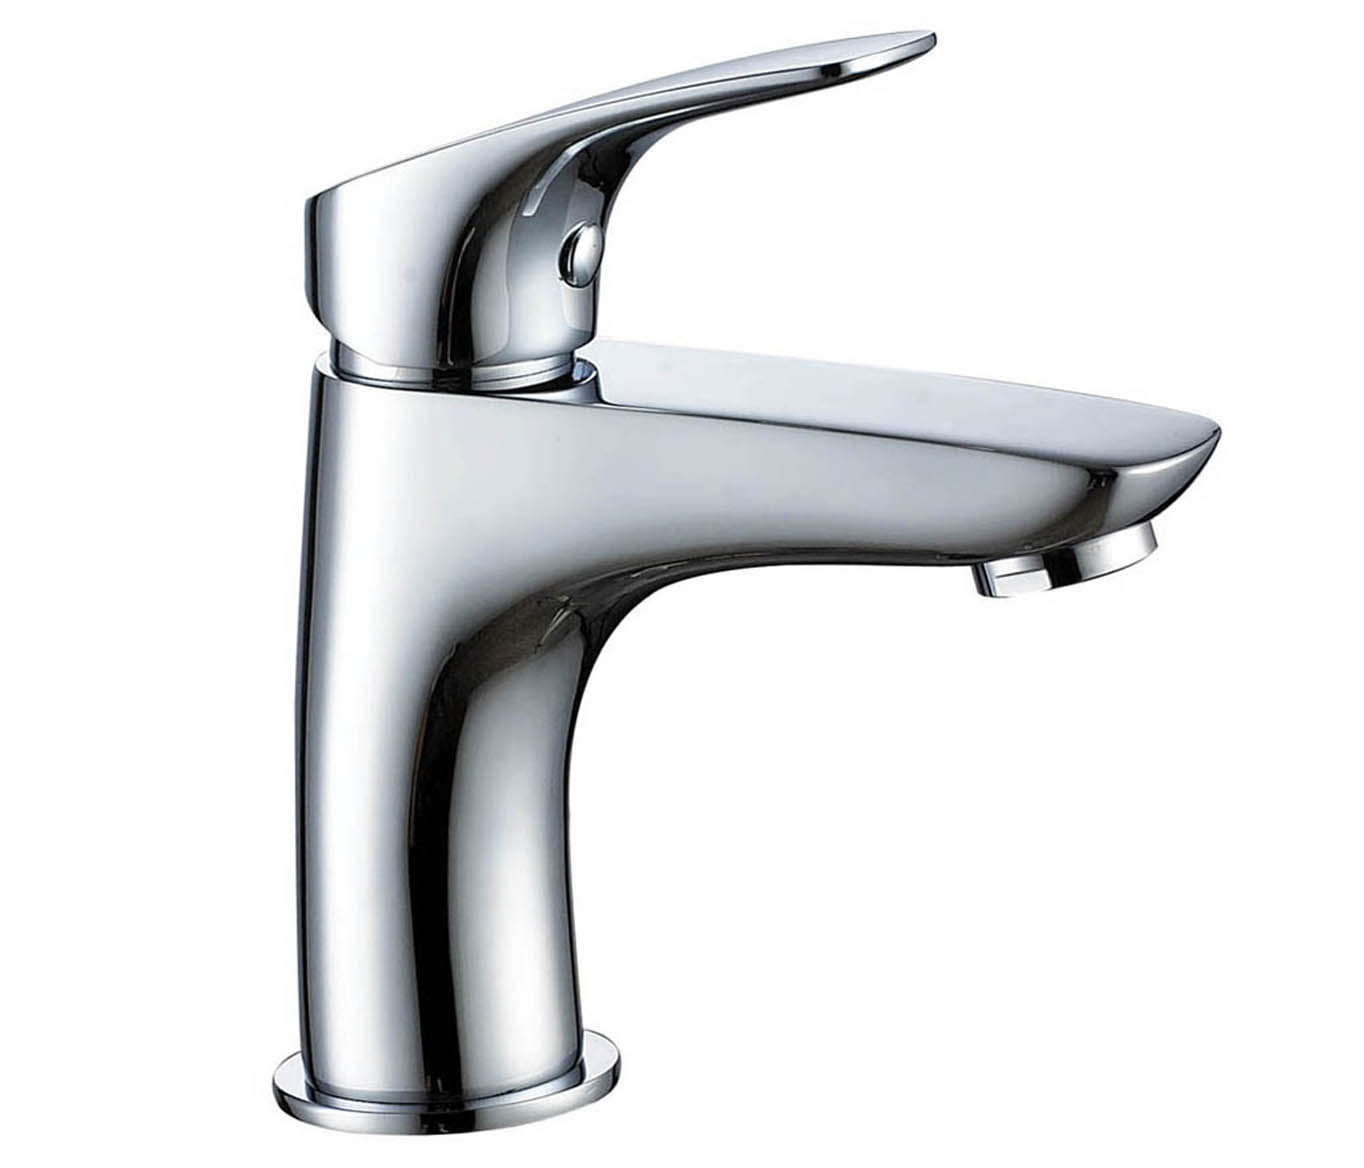 Rize single lever basin mixer without pop up waste, LP 0.2